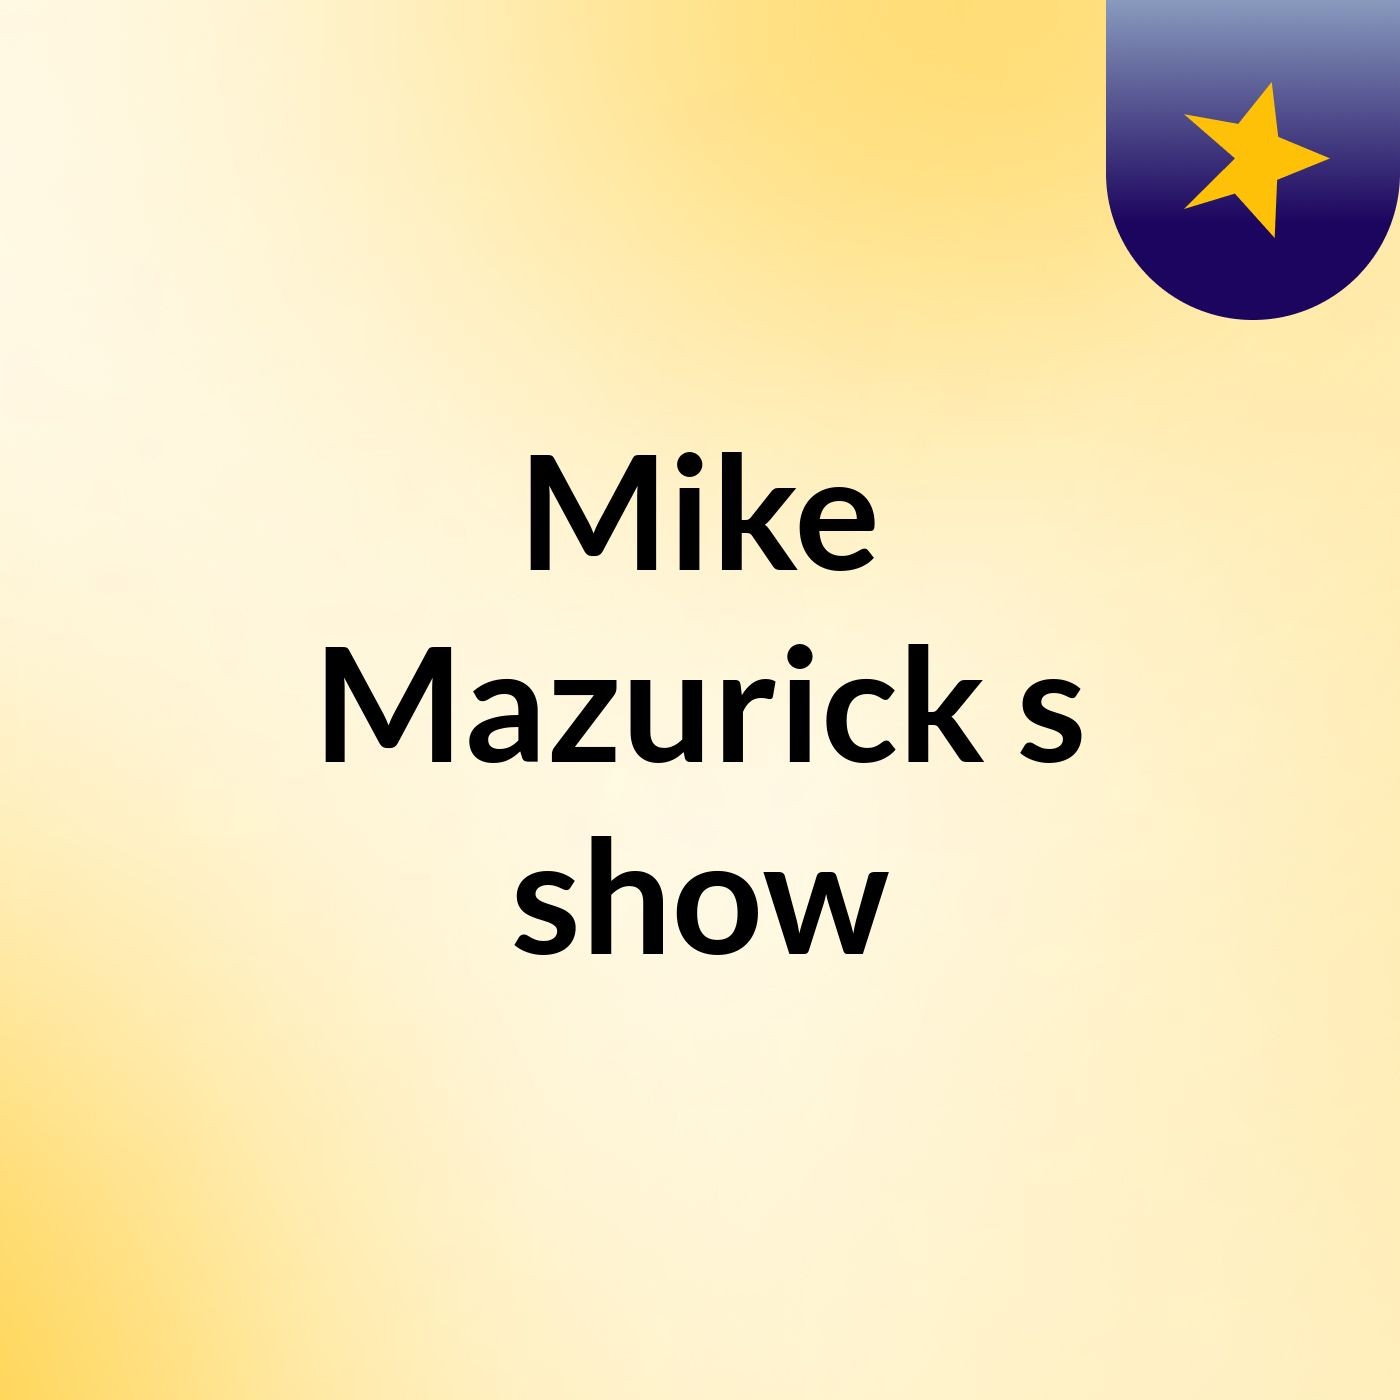 Mike Mazurick's show